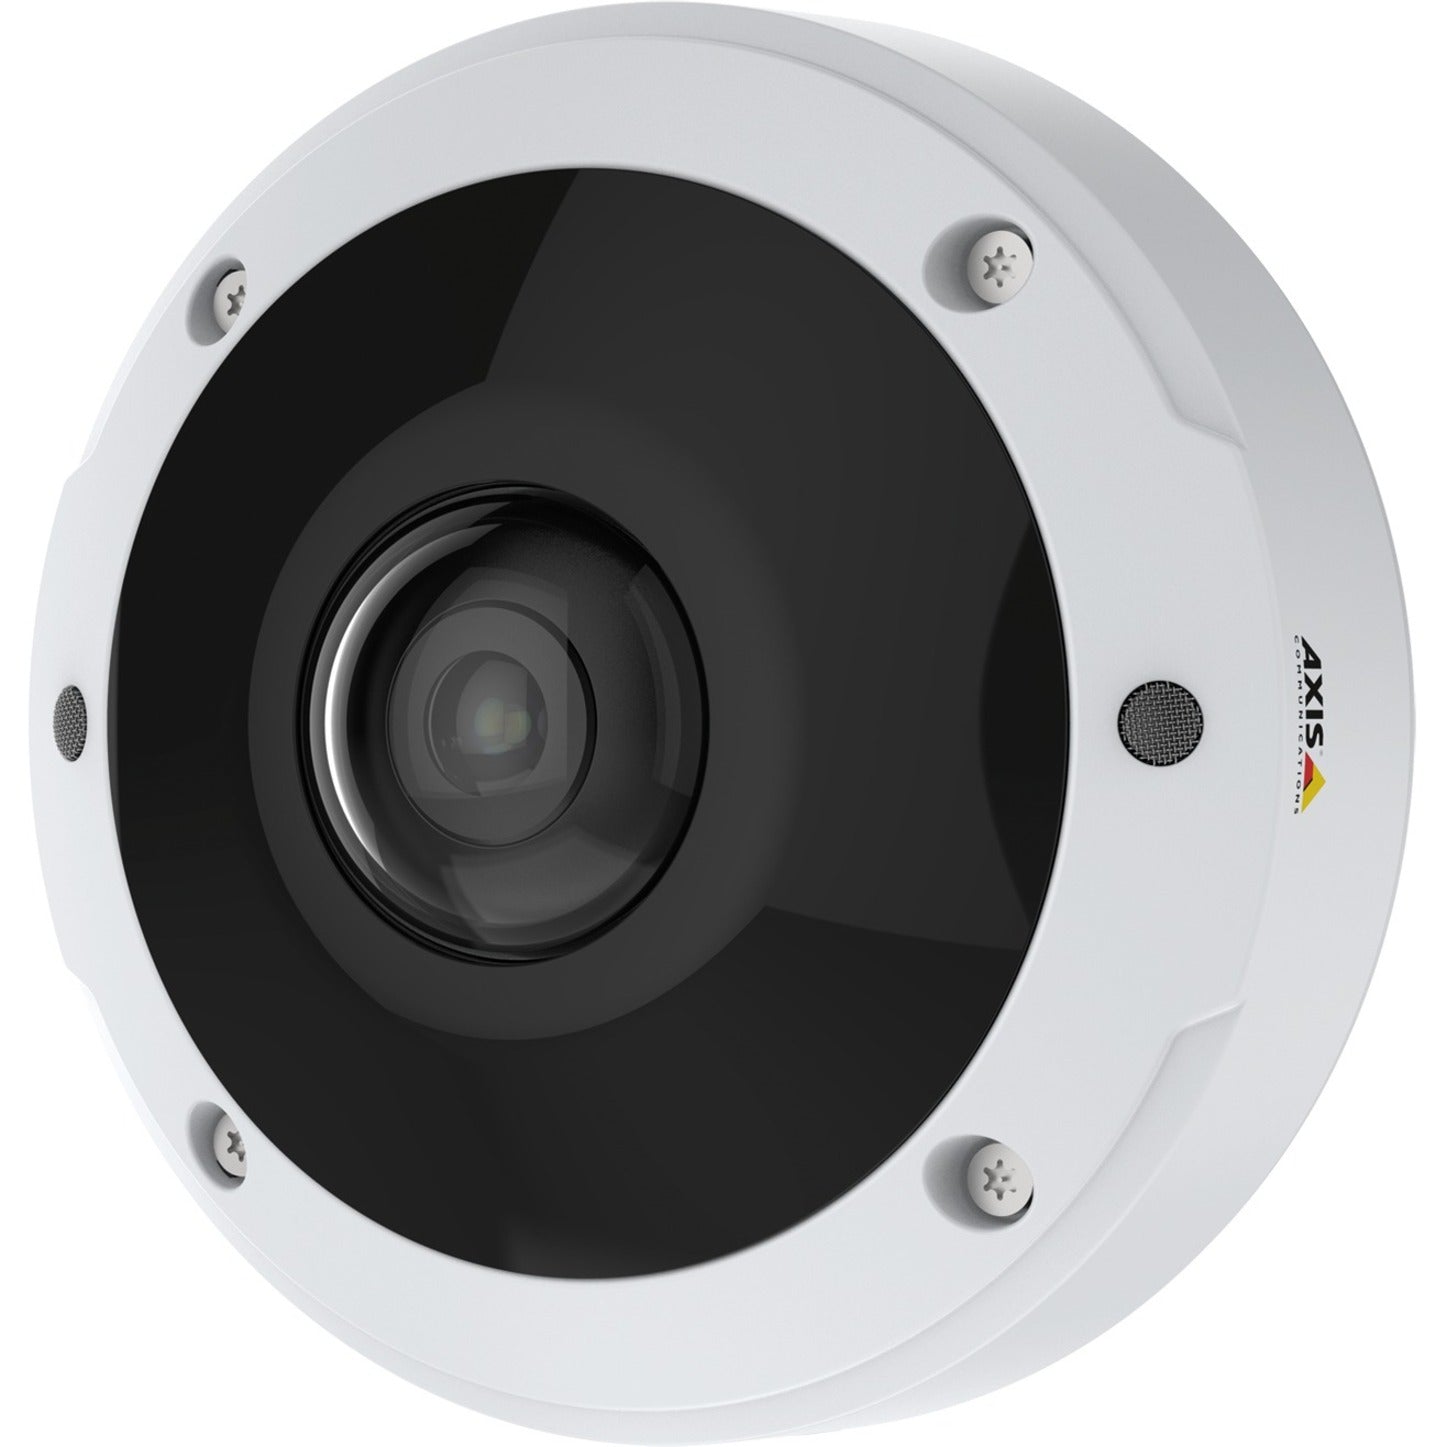 AXIS 02018-001 M3077-PLVE Network Camera, 6 Megapixel Outdoor Dome, Color, 2560 x 1920 Resolution, 60 fps, PoE